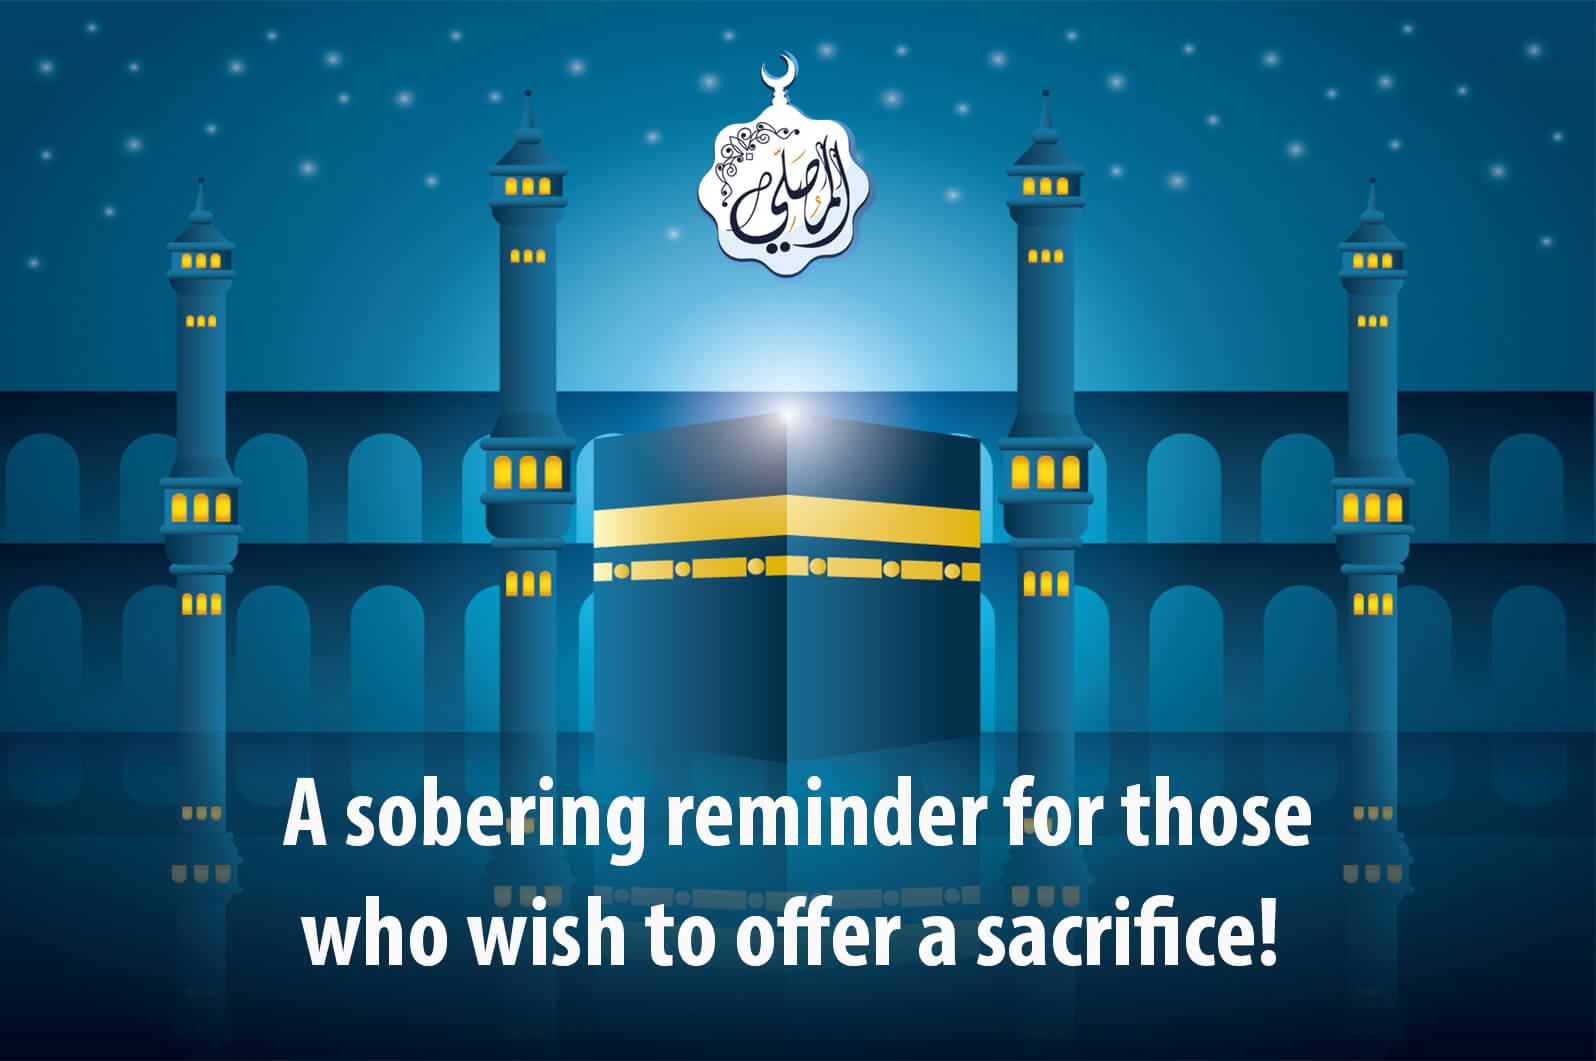 A sobering reminder for those who wish to offer a sacrifice!